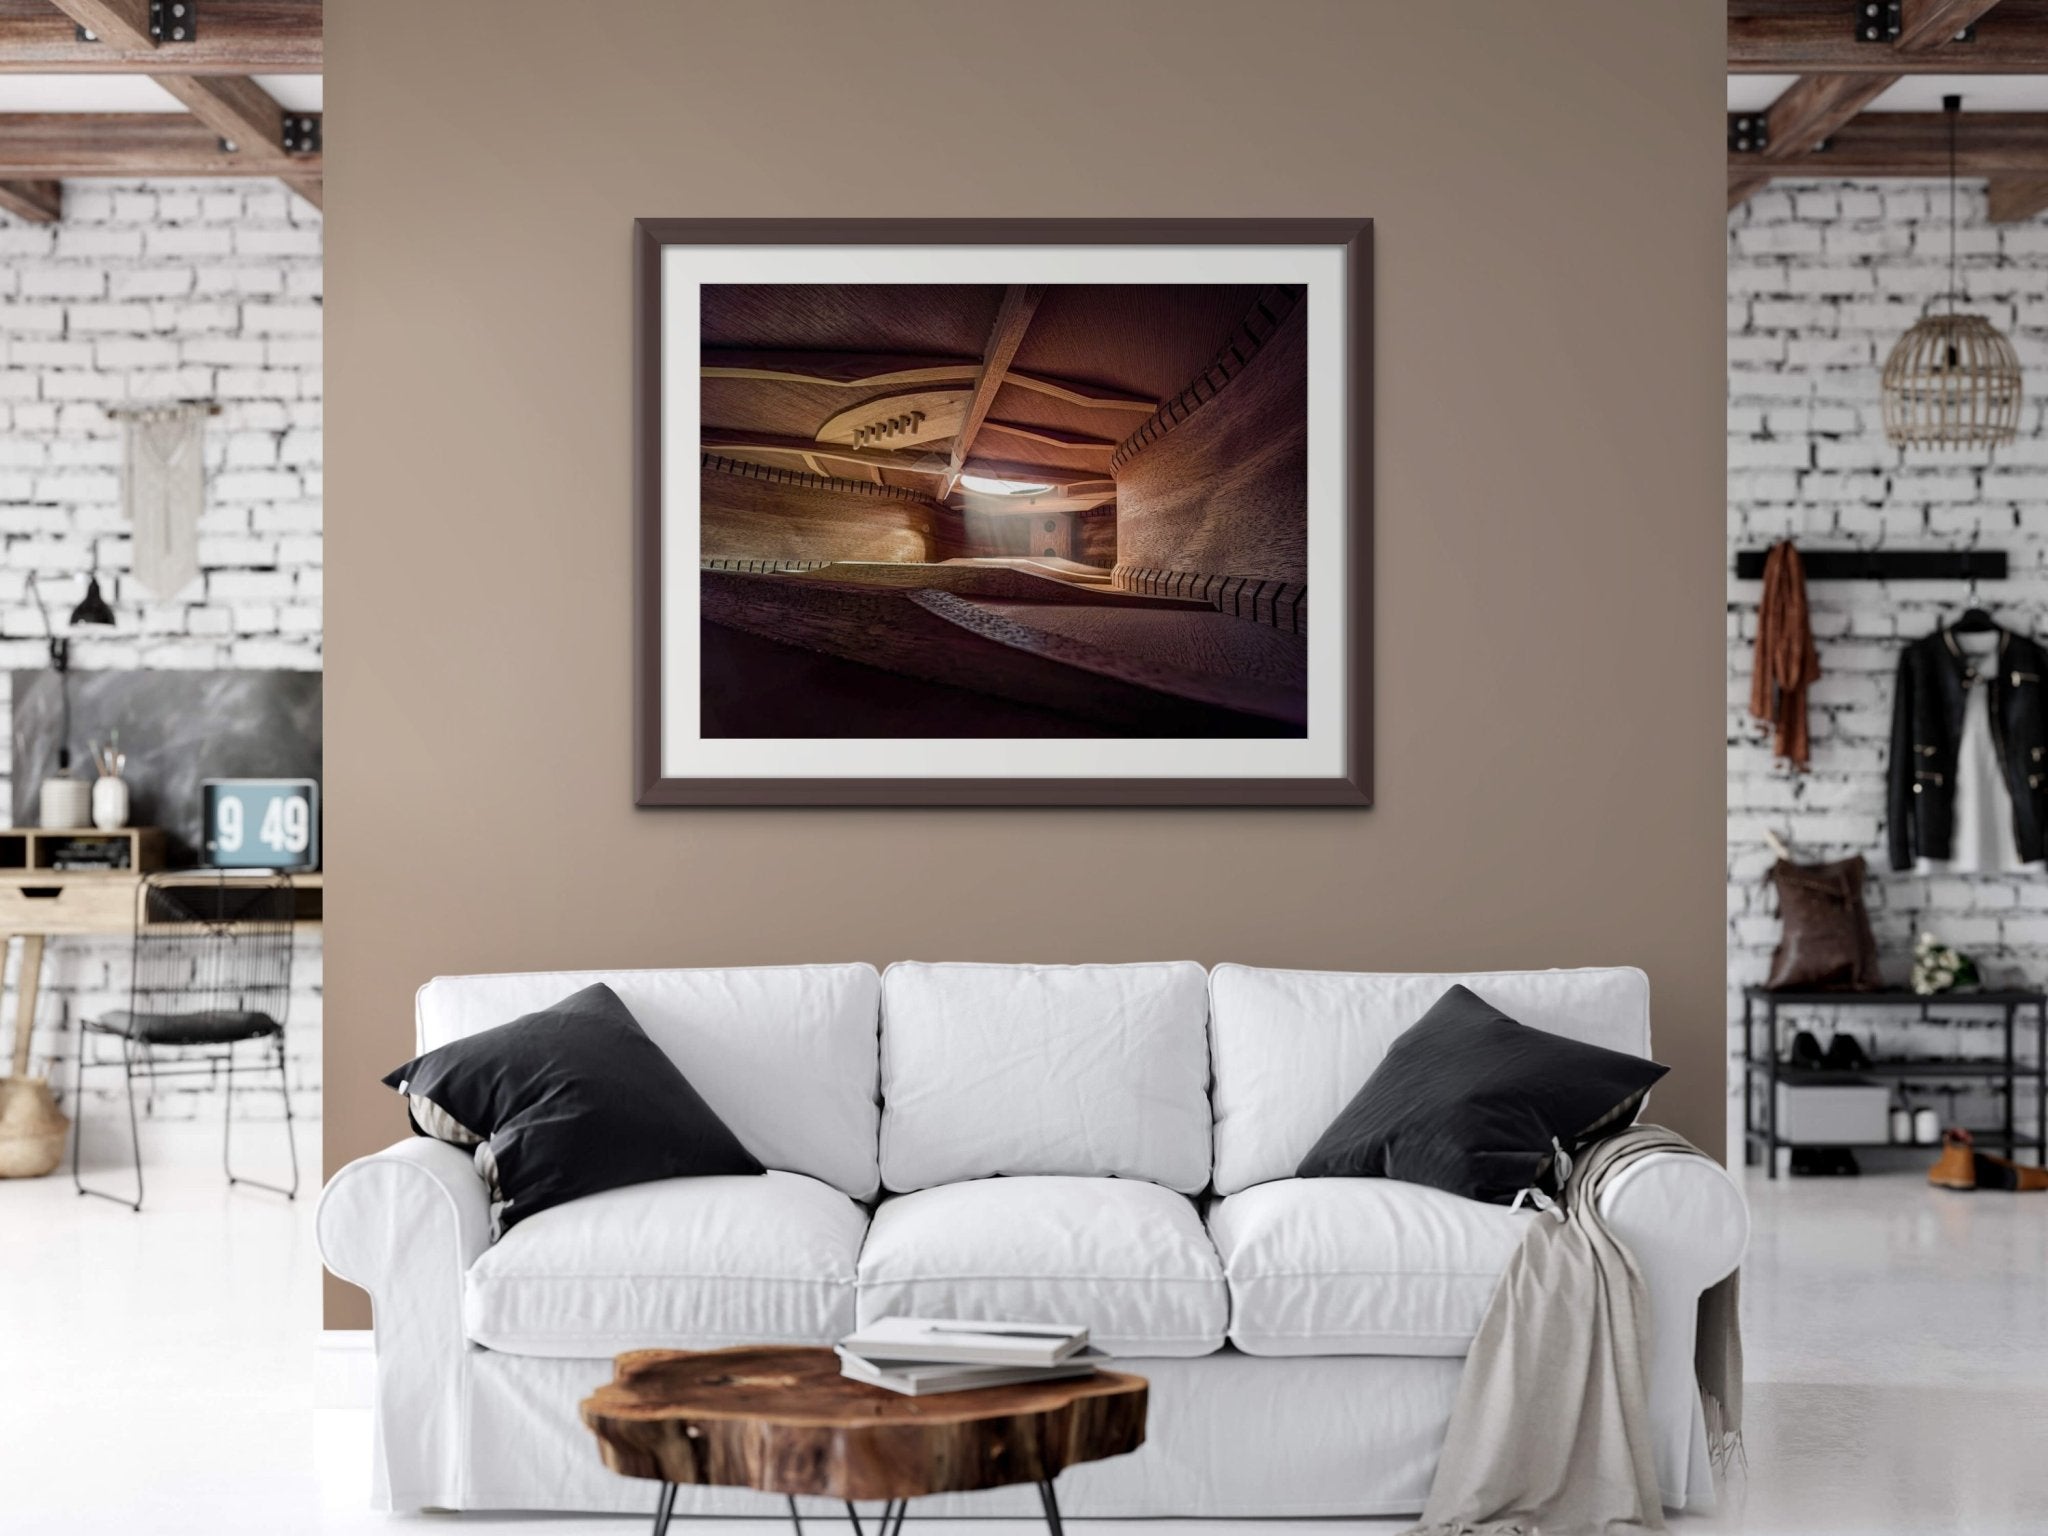 Photo of Inside an Acoustic Guitar, Part 2. Signed Limited Edition Museum Quality Print. - Giclée Museum Quality Print - Architecture In Music